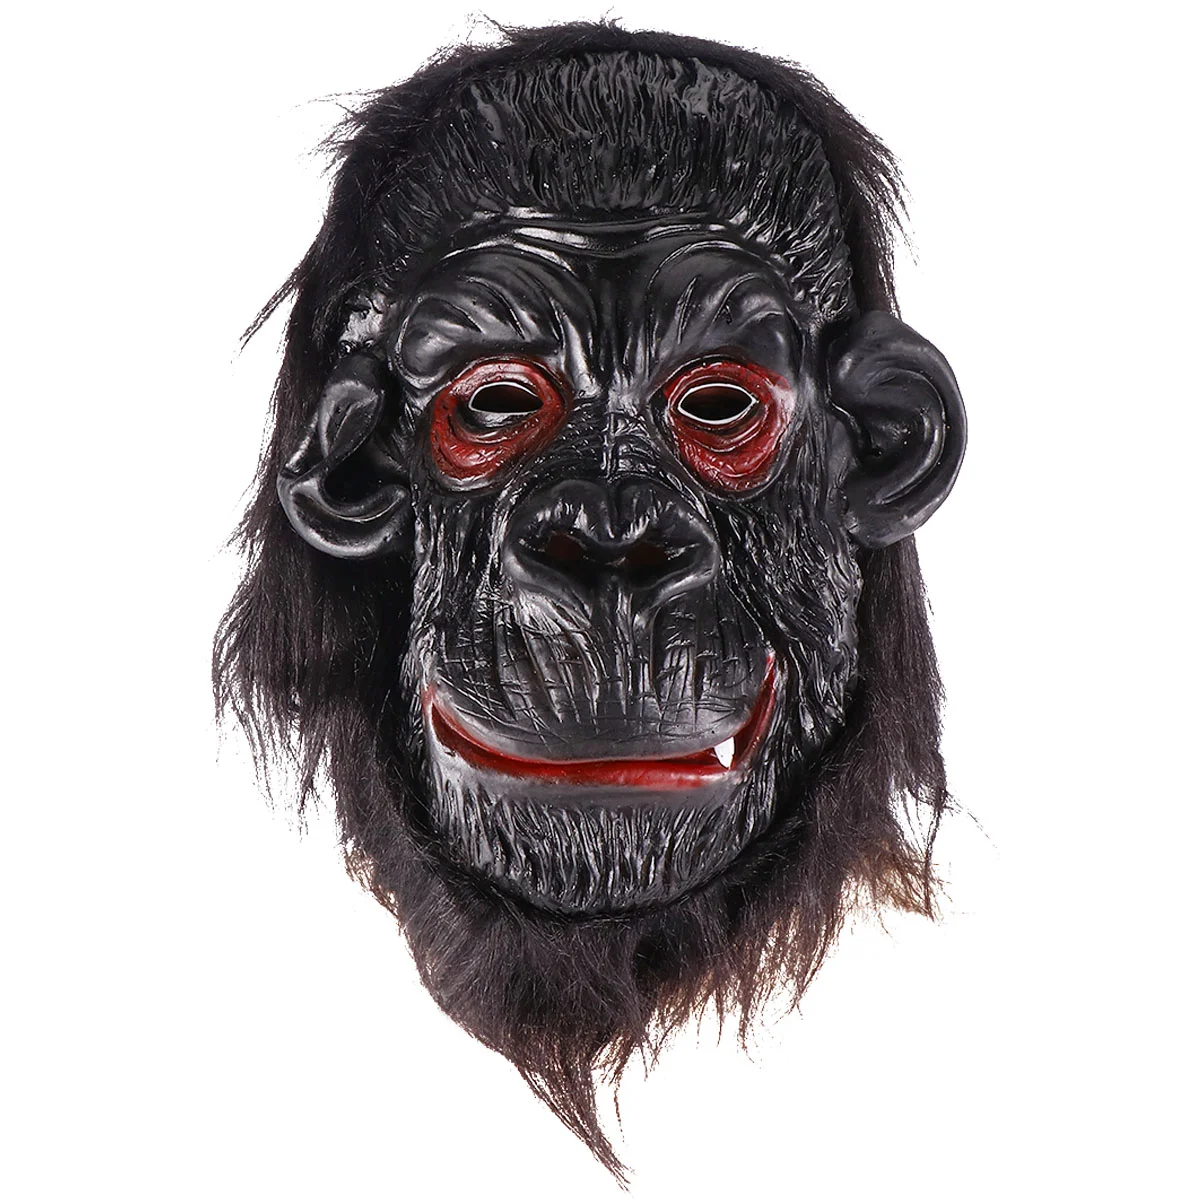 

Gorilla Mask Horror Head Ghost Performance Scary Halloween Party Black Decor Decorate Costume